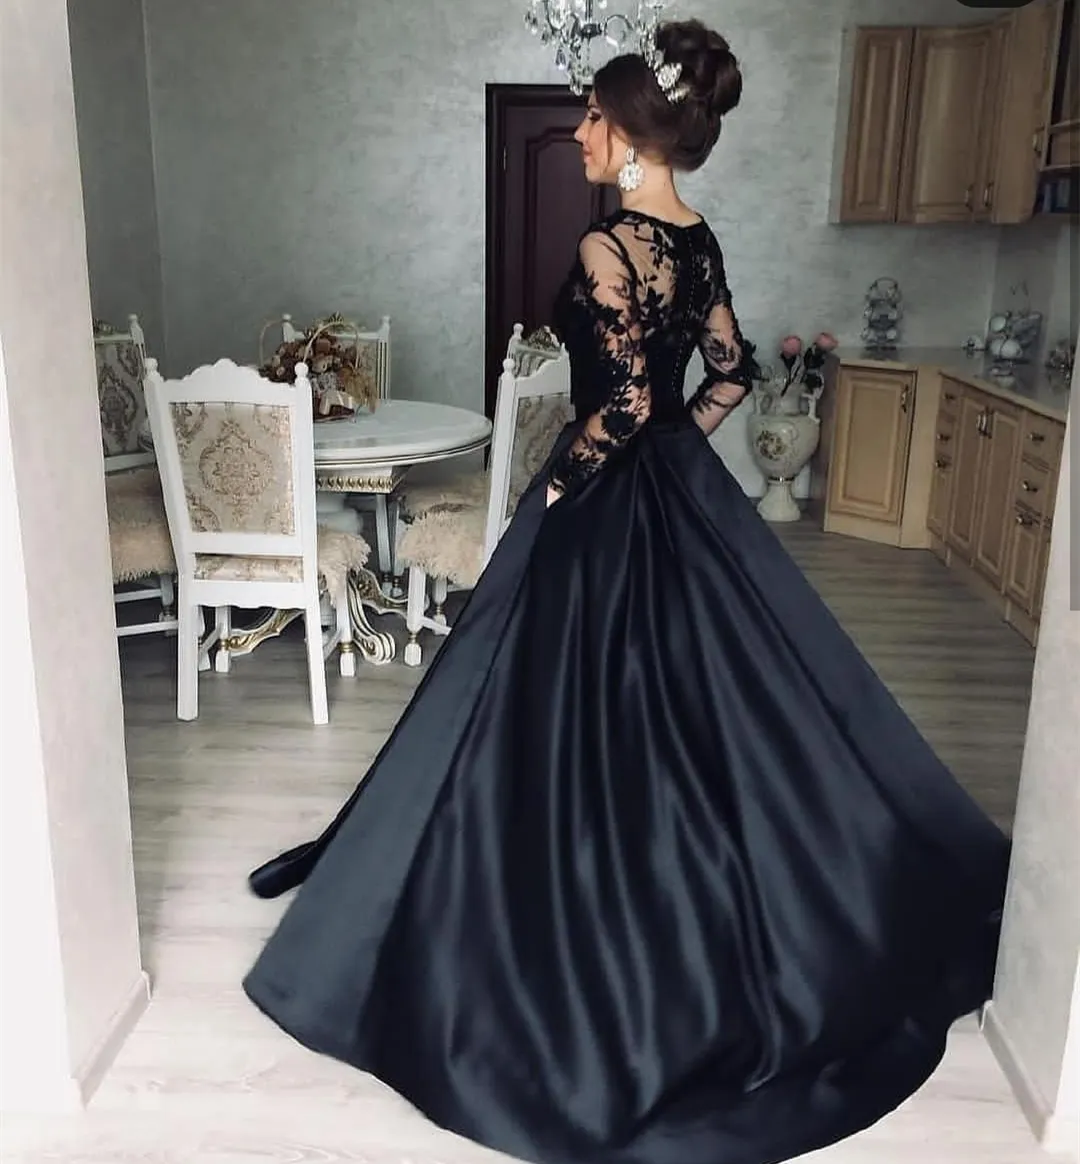 Buy SSPBridal Jewel Neck Velvet Long Sleeves Evening Prom Dresses Mermaid  Court Train Party Gowns Formal Zipper Back Black 6 at Amazon.in